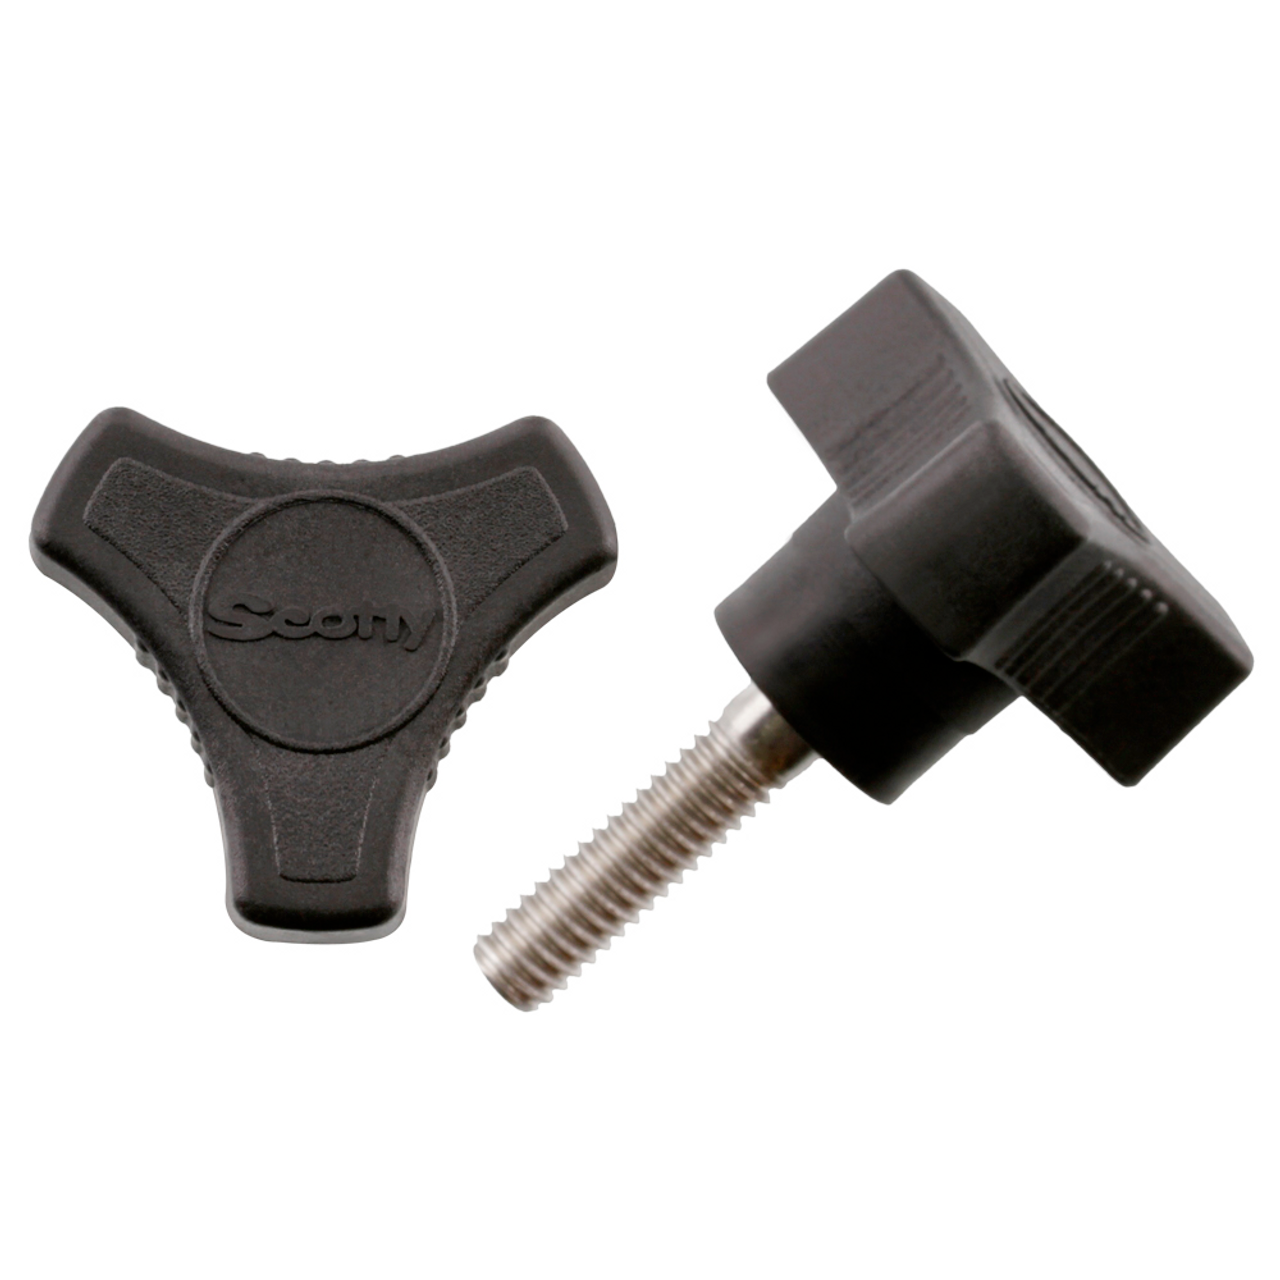 Scotty Replacement Mounting Bolts, 2 Pack